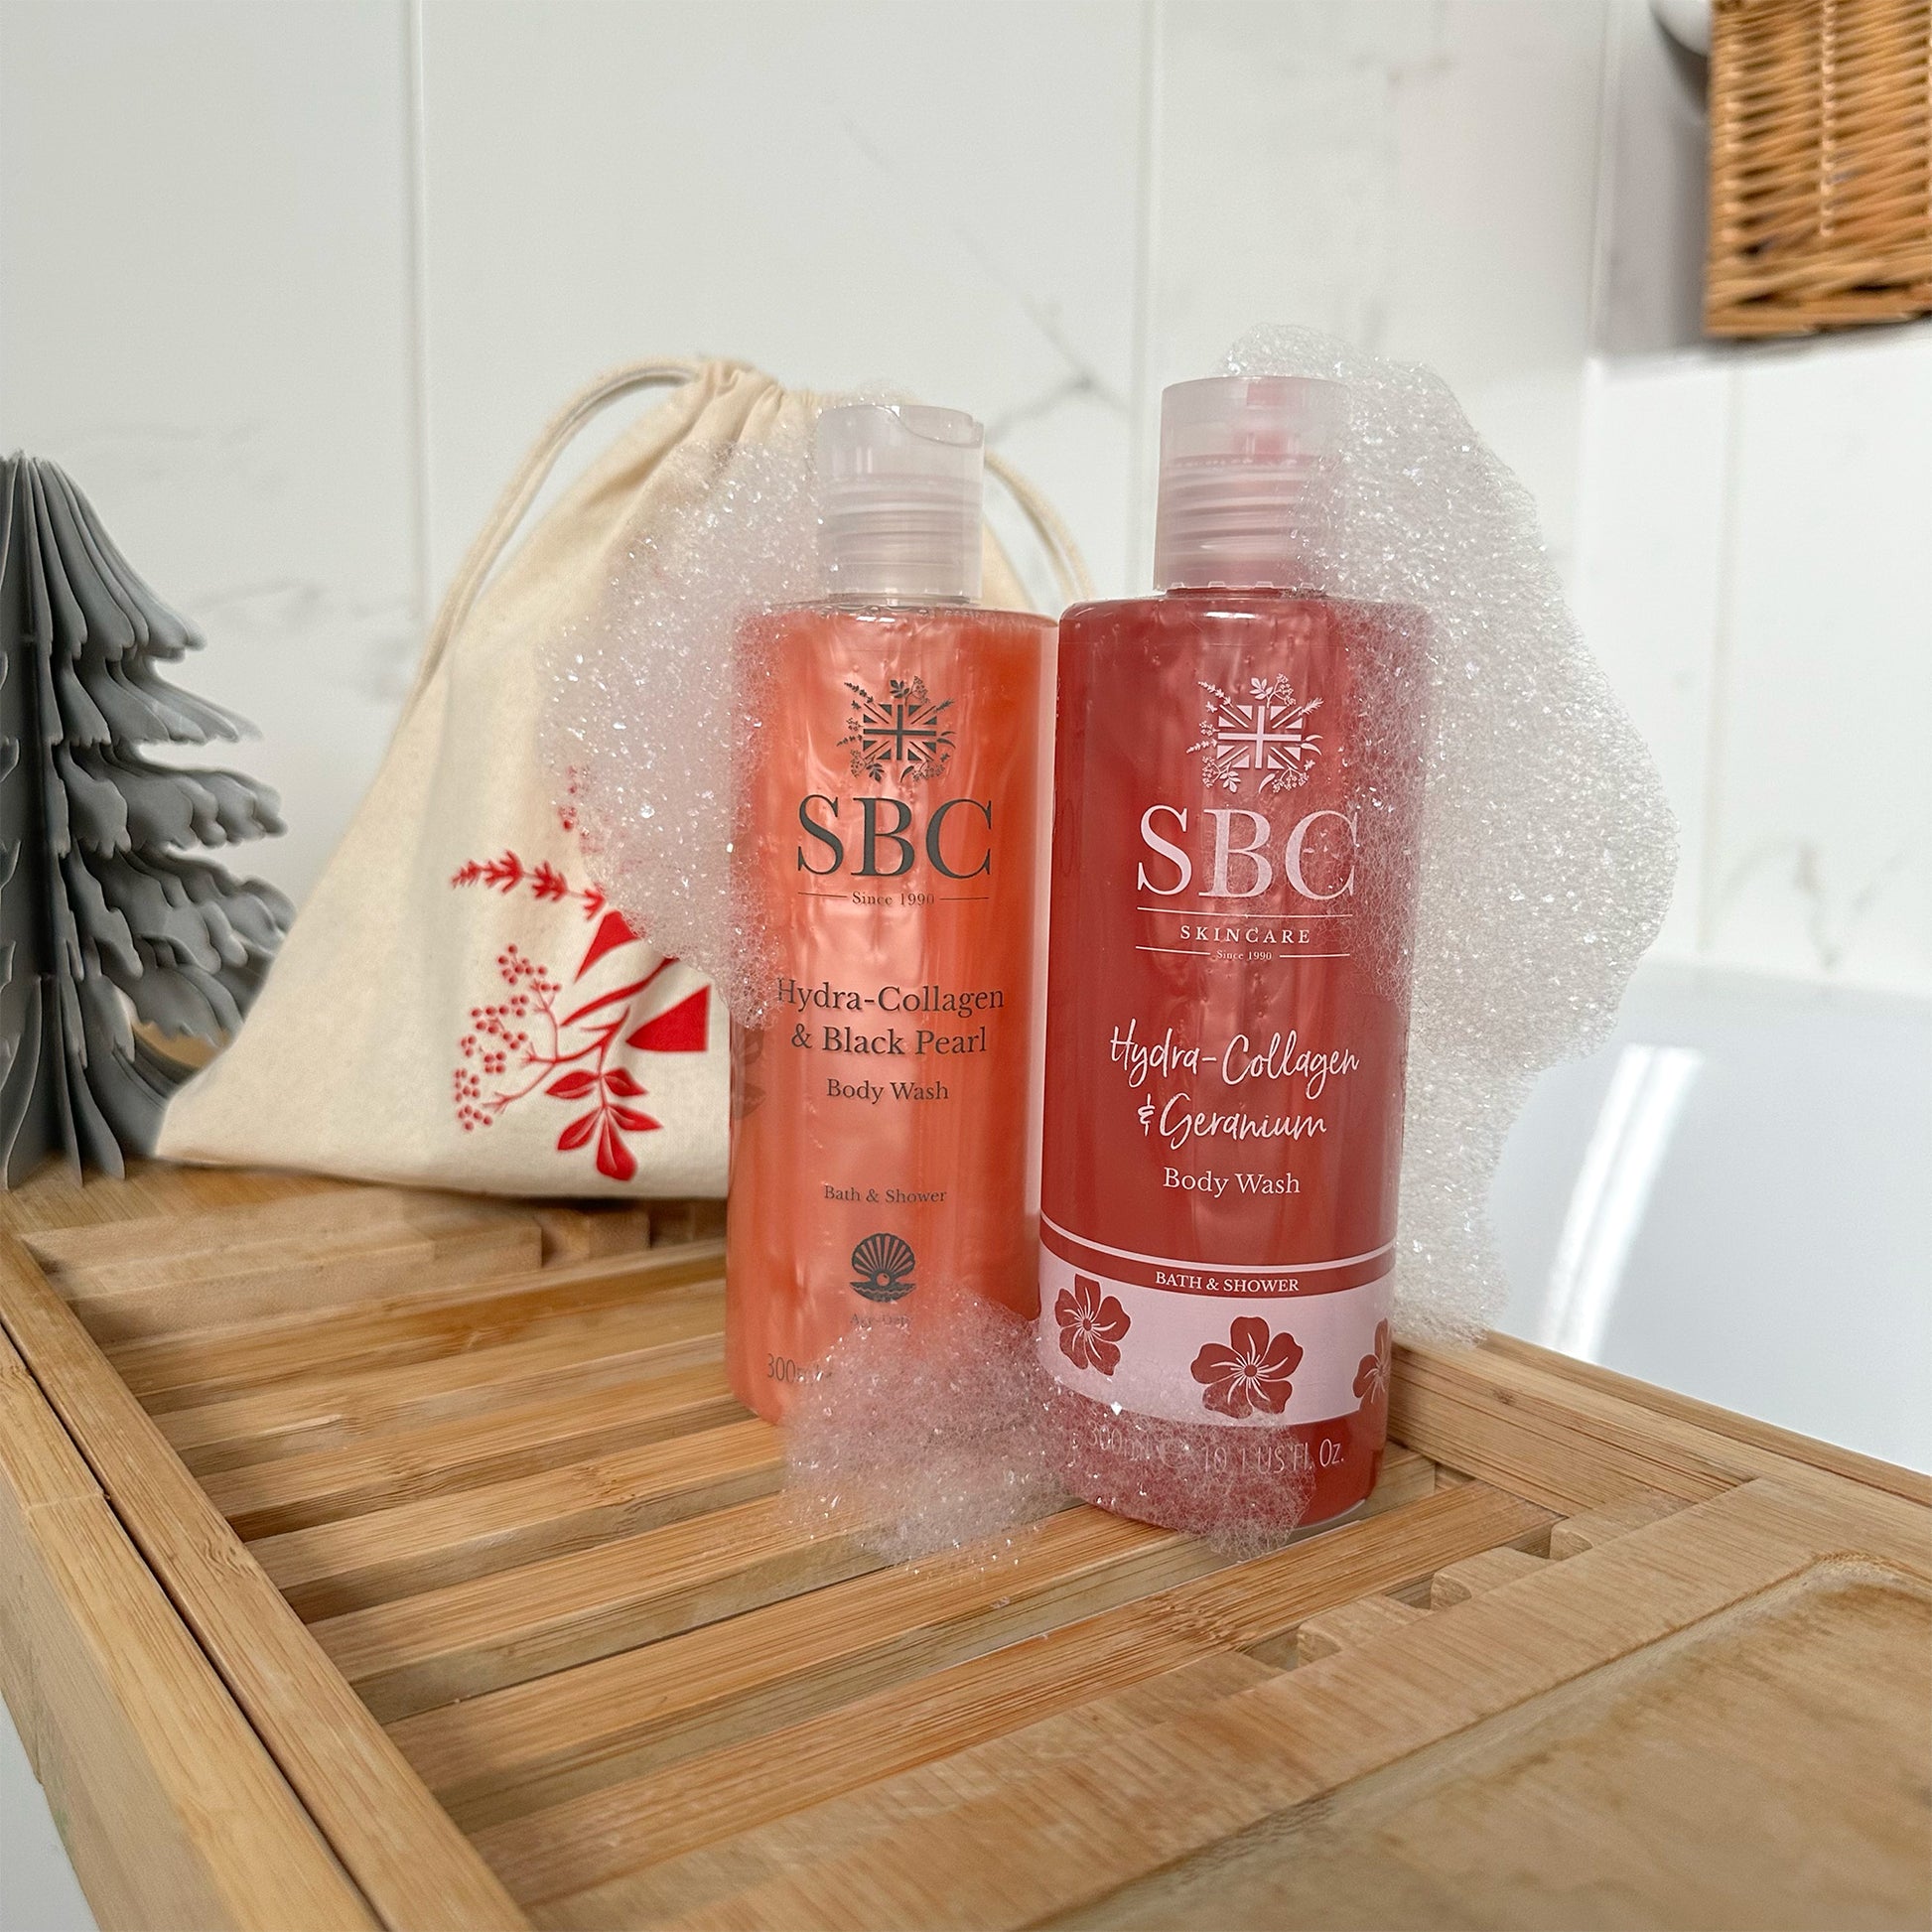 SBC Skincare's Hydra-Collagen & Geranium and Hydra-Collagen and Black Pearl Body Wash on a wooden bath caddy